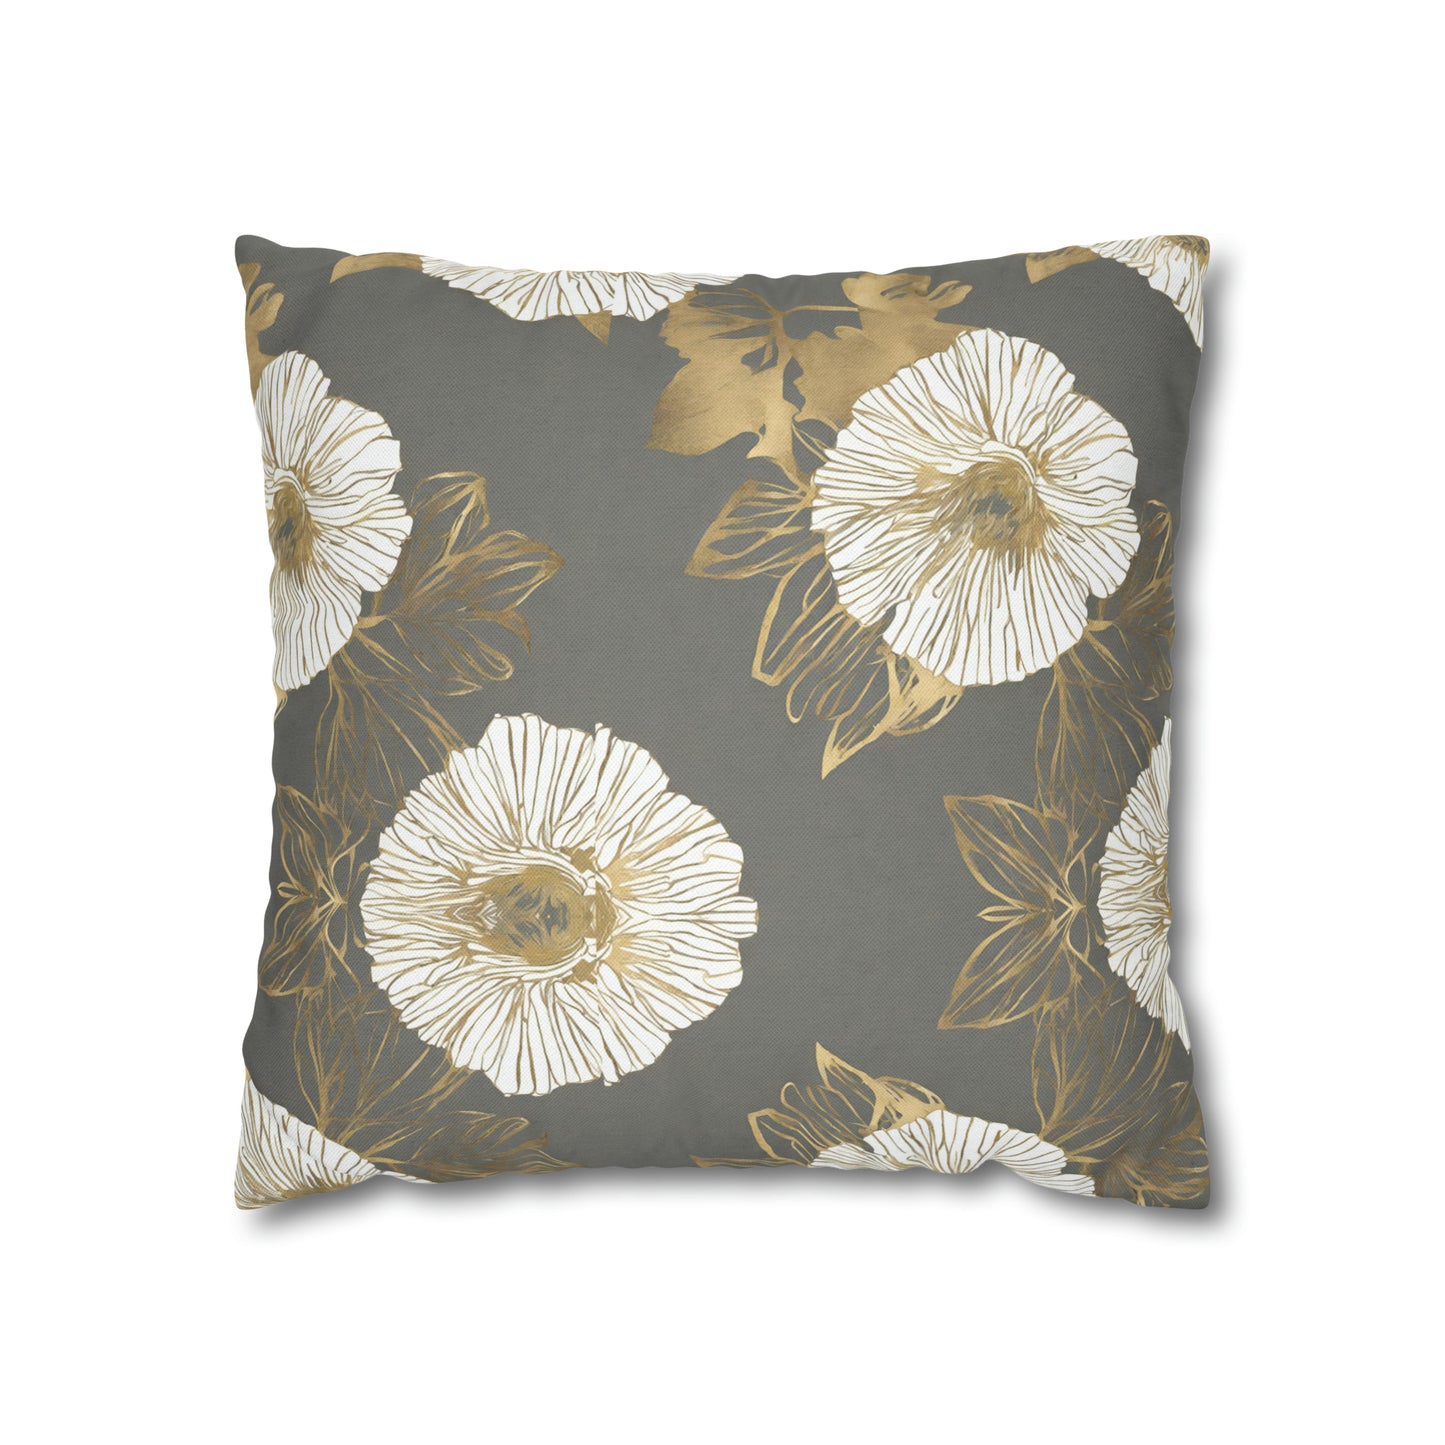 Grey, Cream, And Gold Floral Throw Pillow Cover